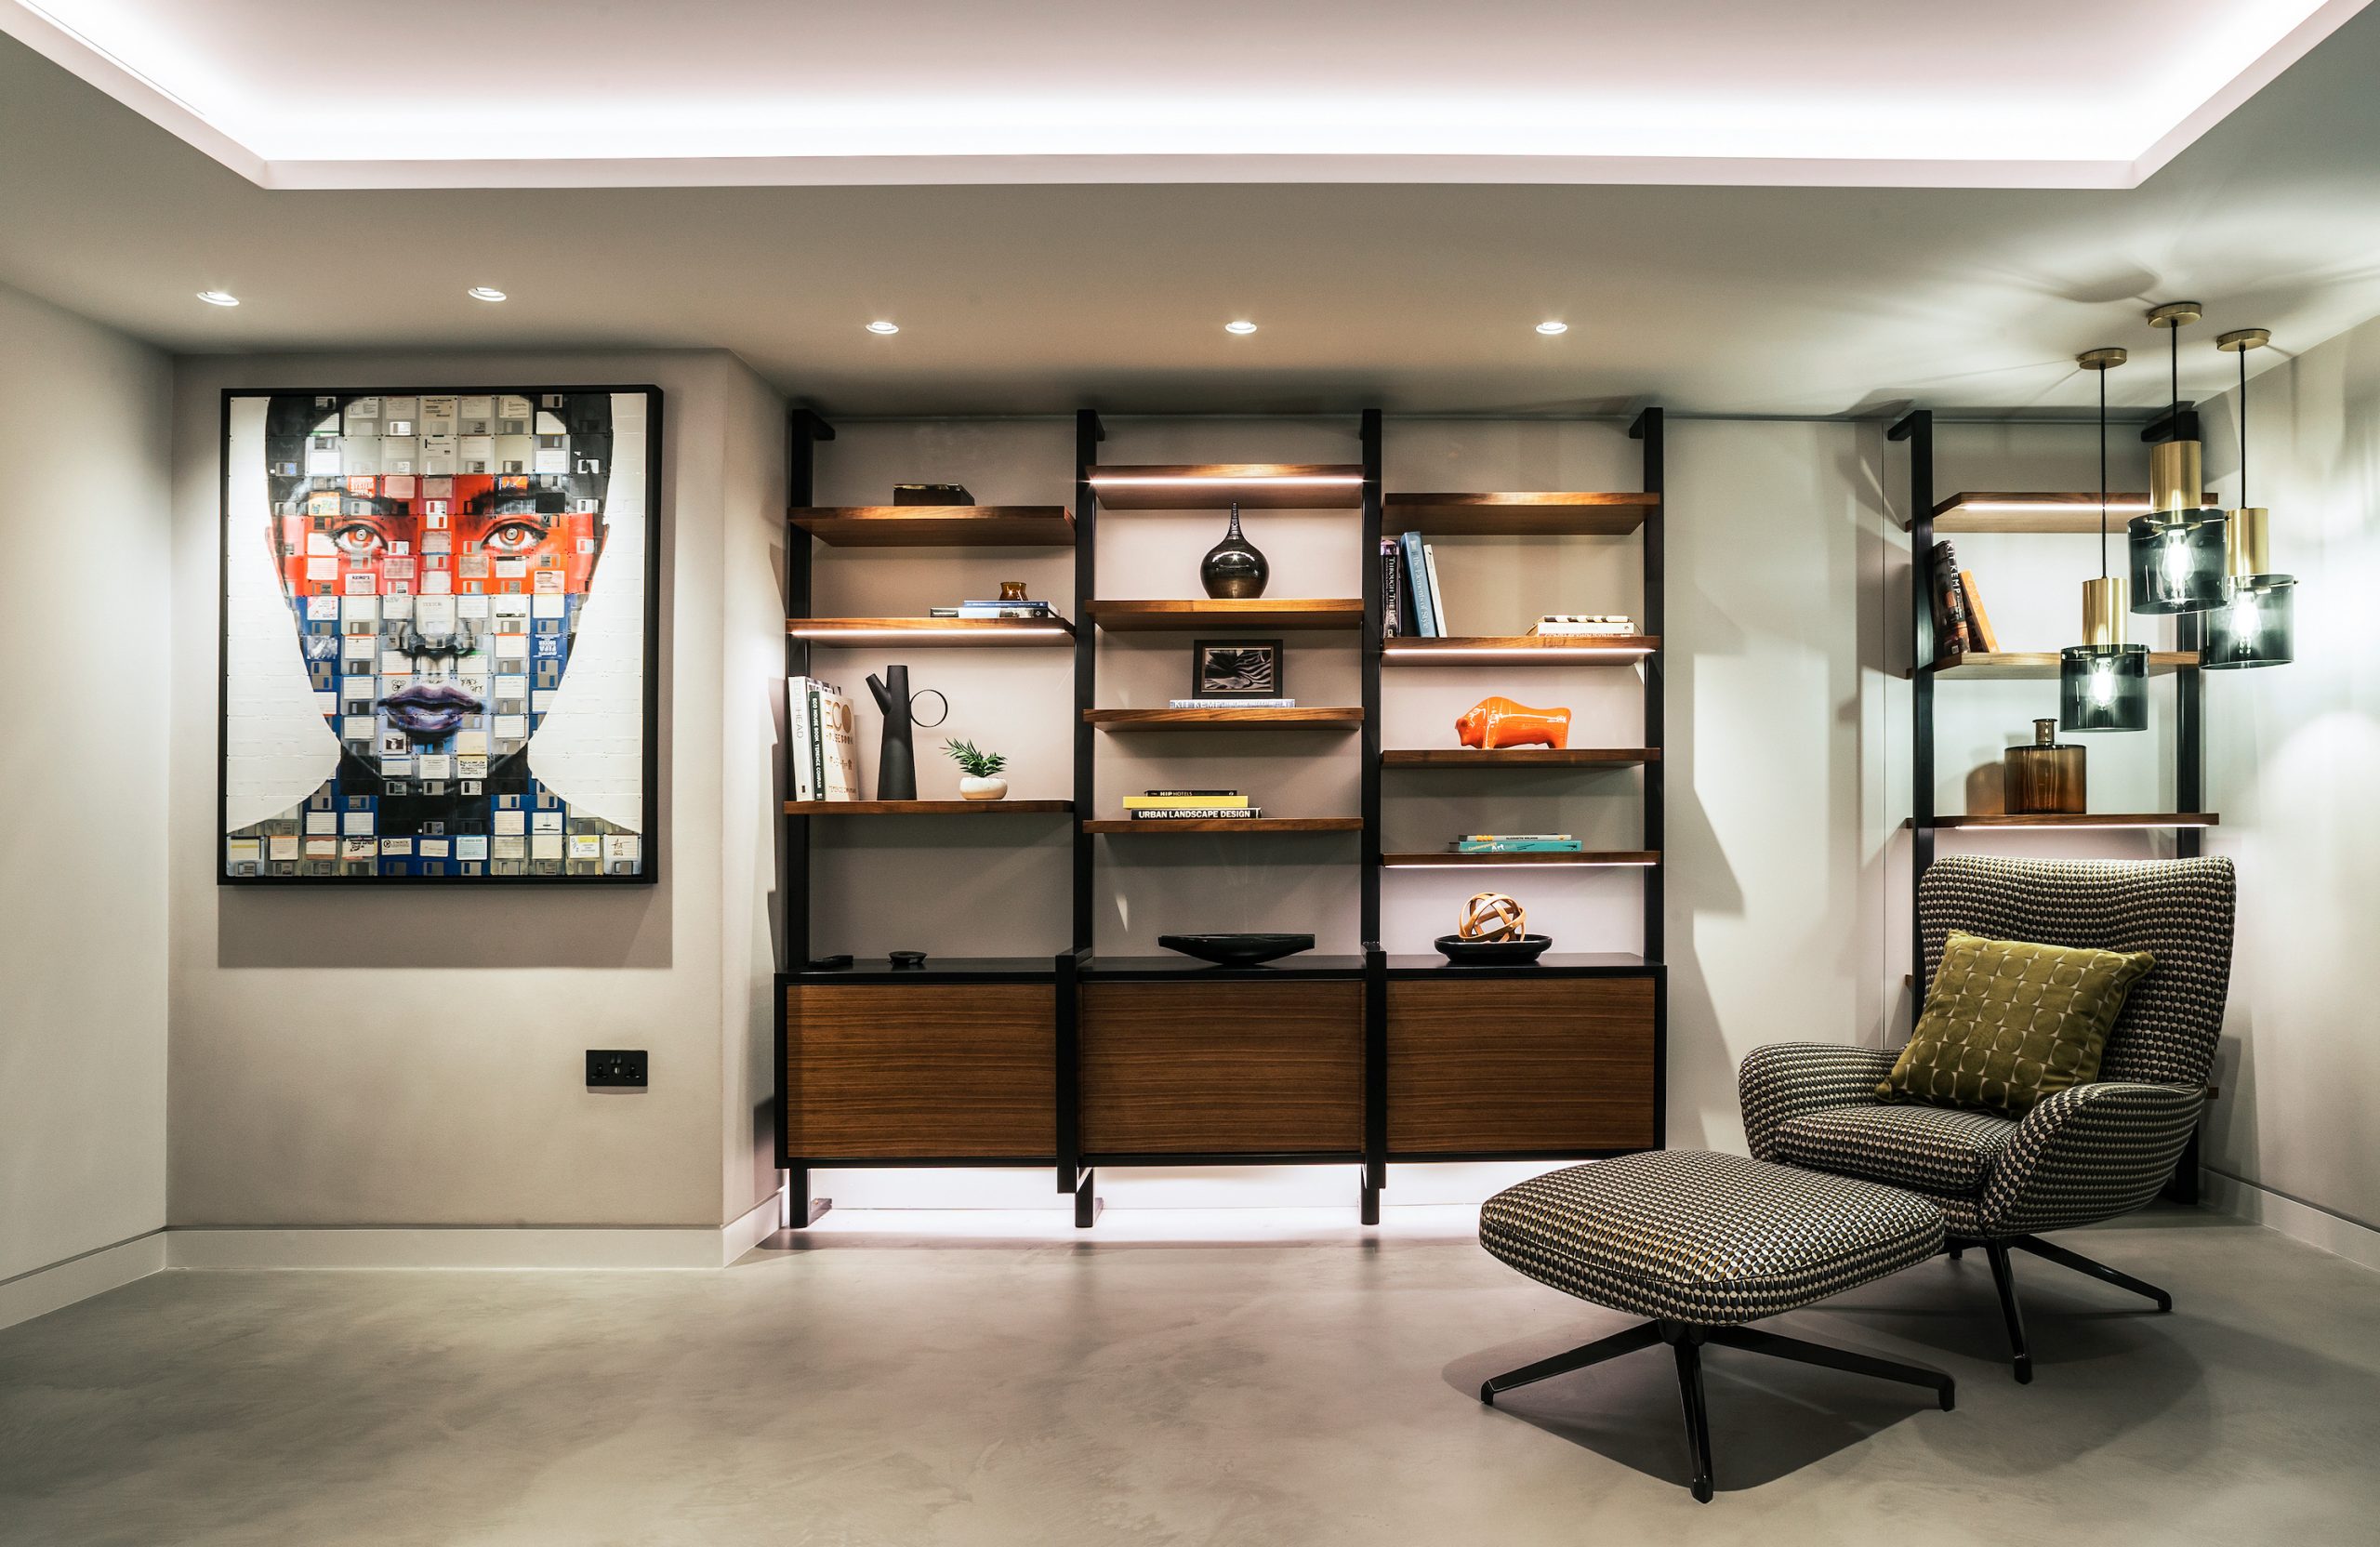 Hampstead Penthouse - Living Room - Bespoke Joinery With Integrated Lighting